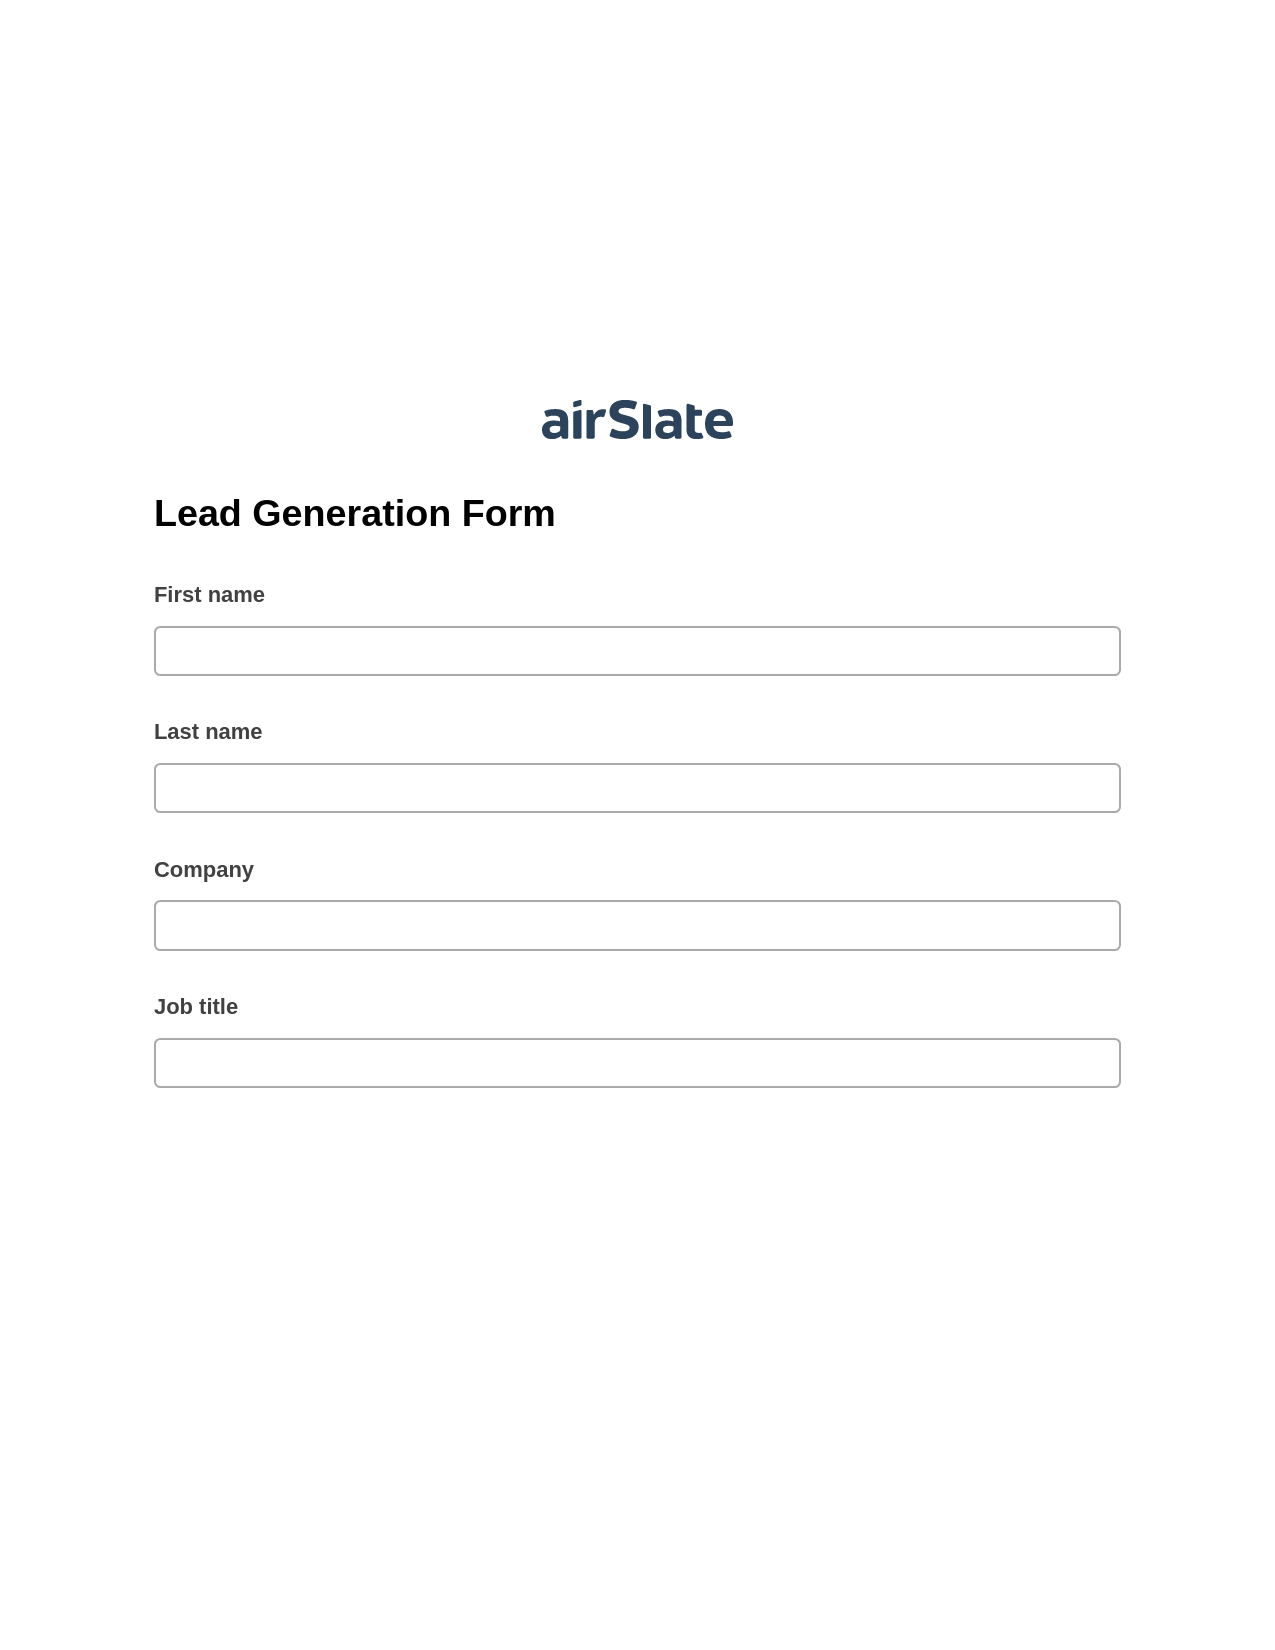 Lead Generation Form Pre-fill from CSV File Bot, Send a Slate to MS Dynamics 365 Contact Bot, Export to Google Sheet Bot